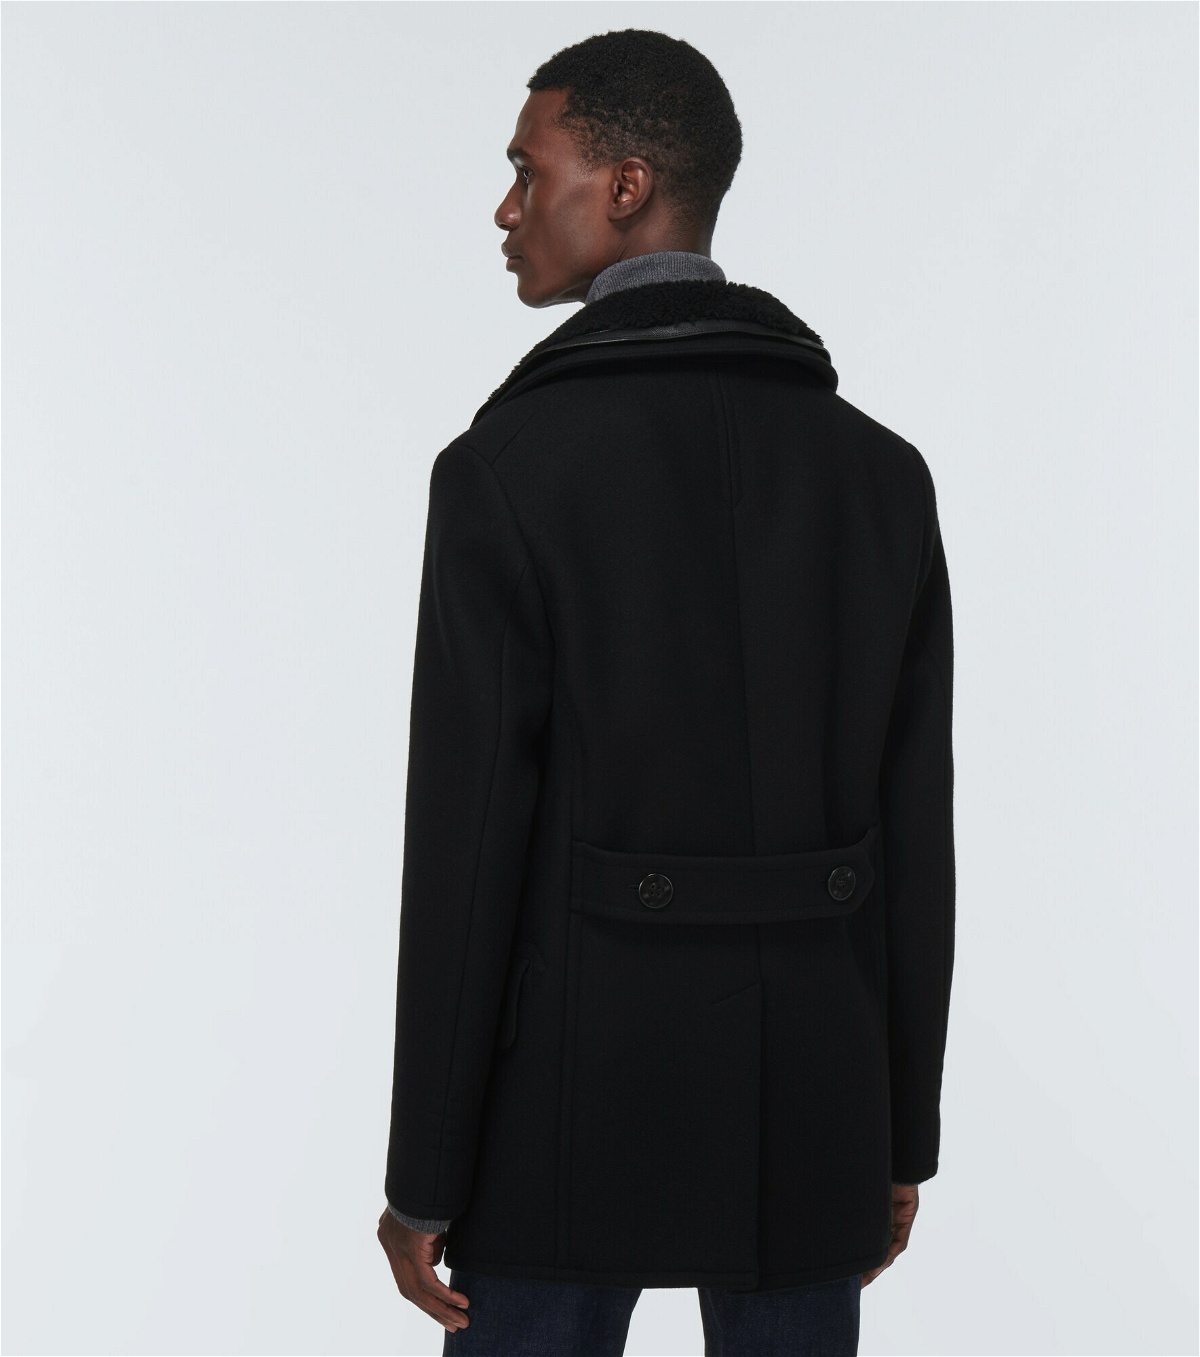 Tom Ford - Faux shearling-trimmed peacoat TOM FORD